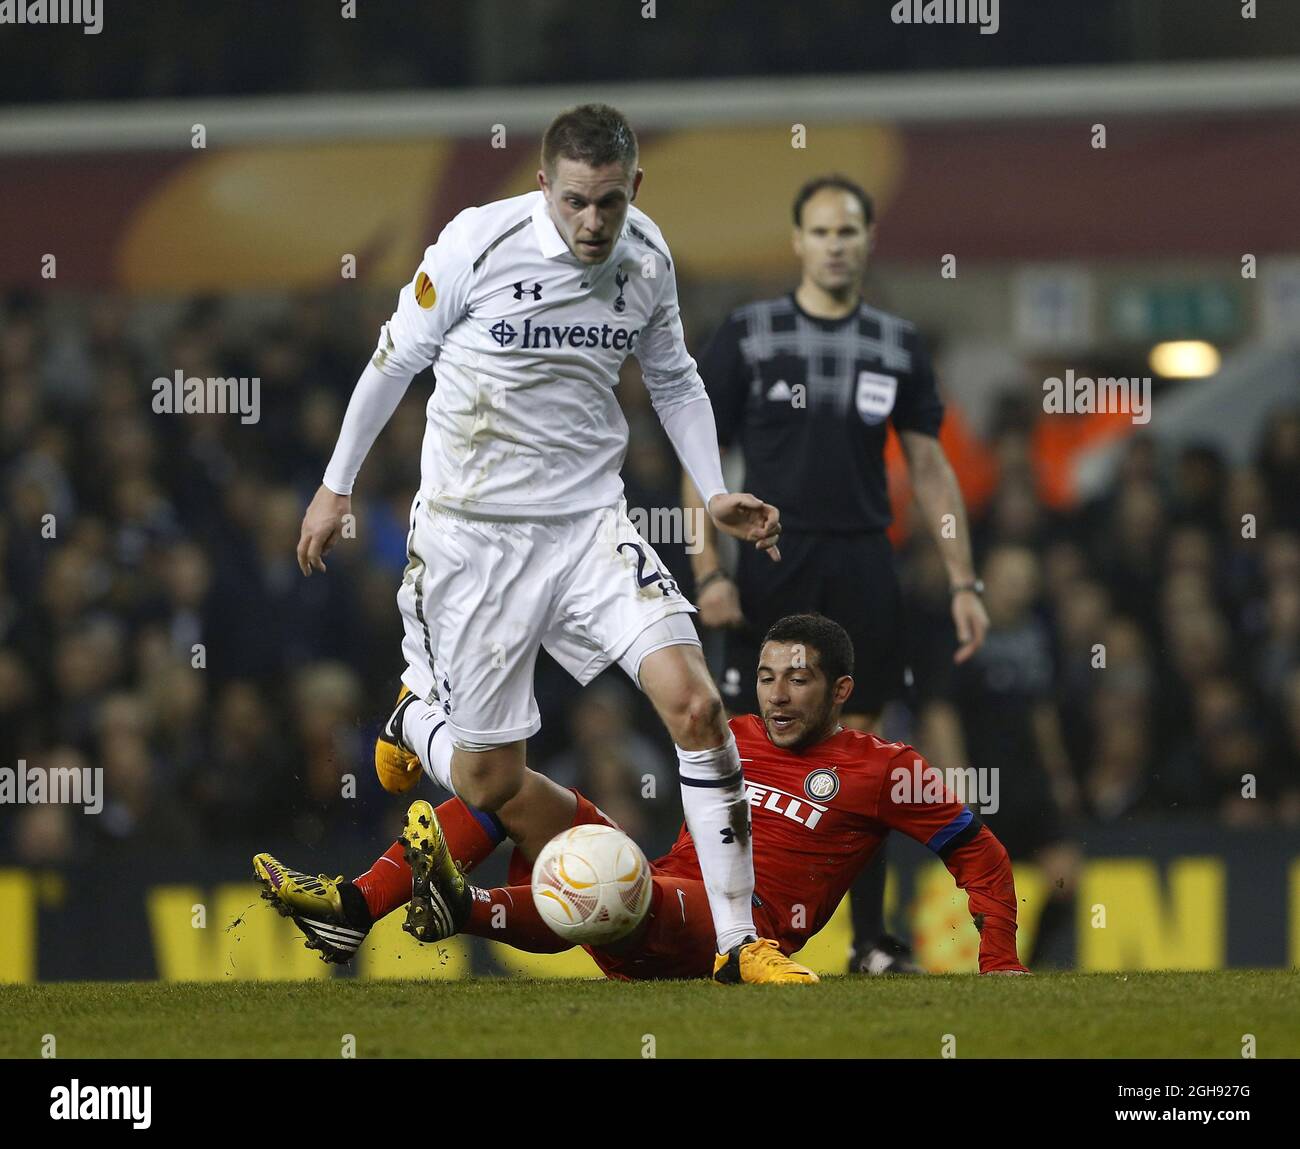 Tottenham's Gylfi Sigurdsson tussles with Inter's Walter Gargano during the UEFA Europa League round of 16 first leg soccer match between Tottenham Hotspur and Inter Milan at White Hart Lane in London, United Kingdom on Thursday, March 7, 2013. Stock Photo